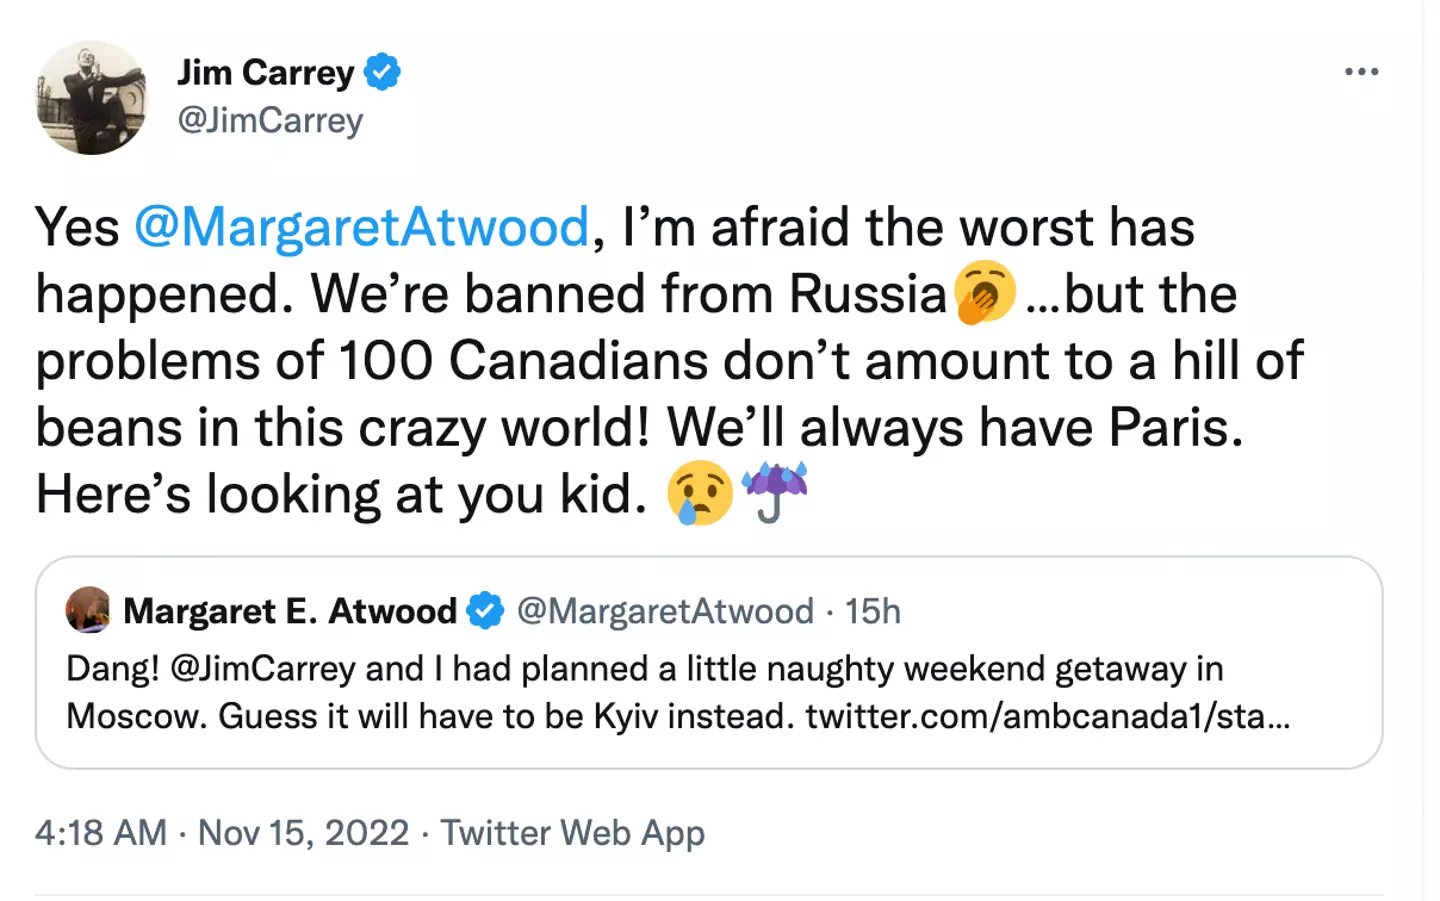 Carrey doesn't seem that bothered about being banned from Russia.